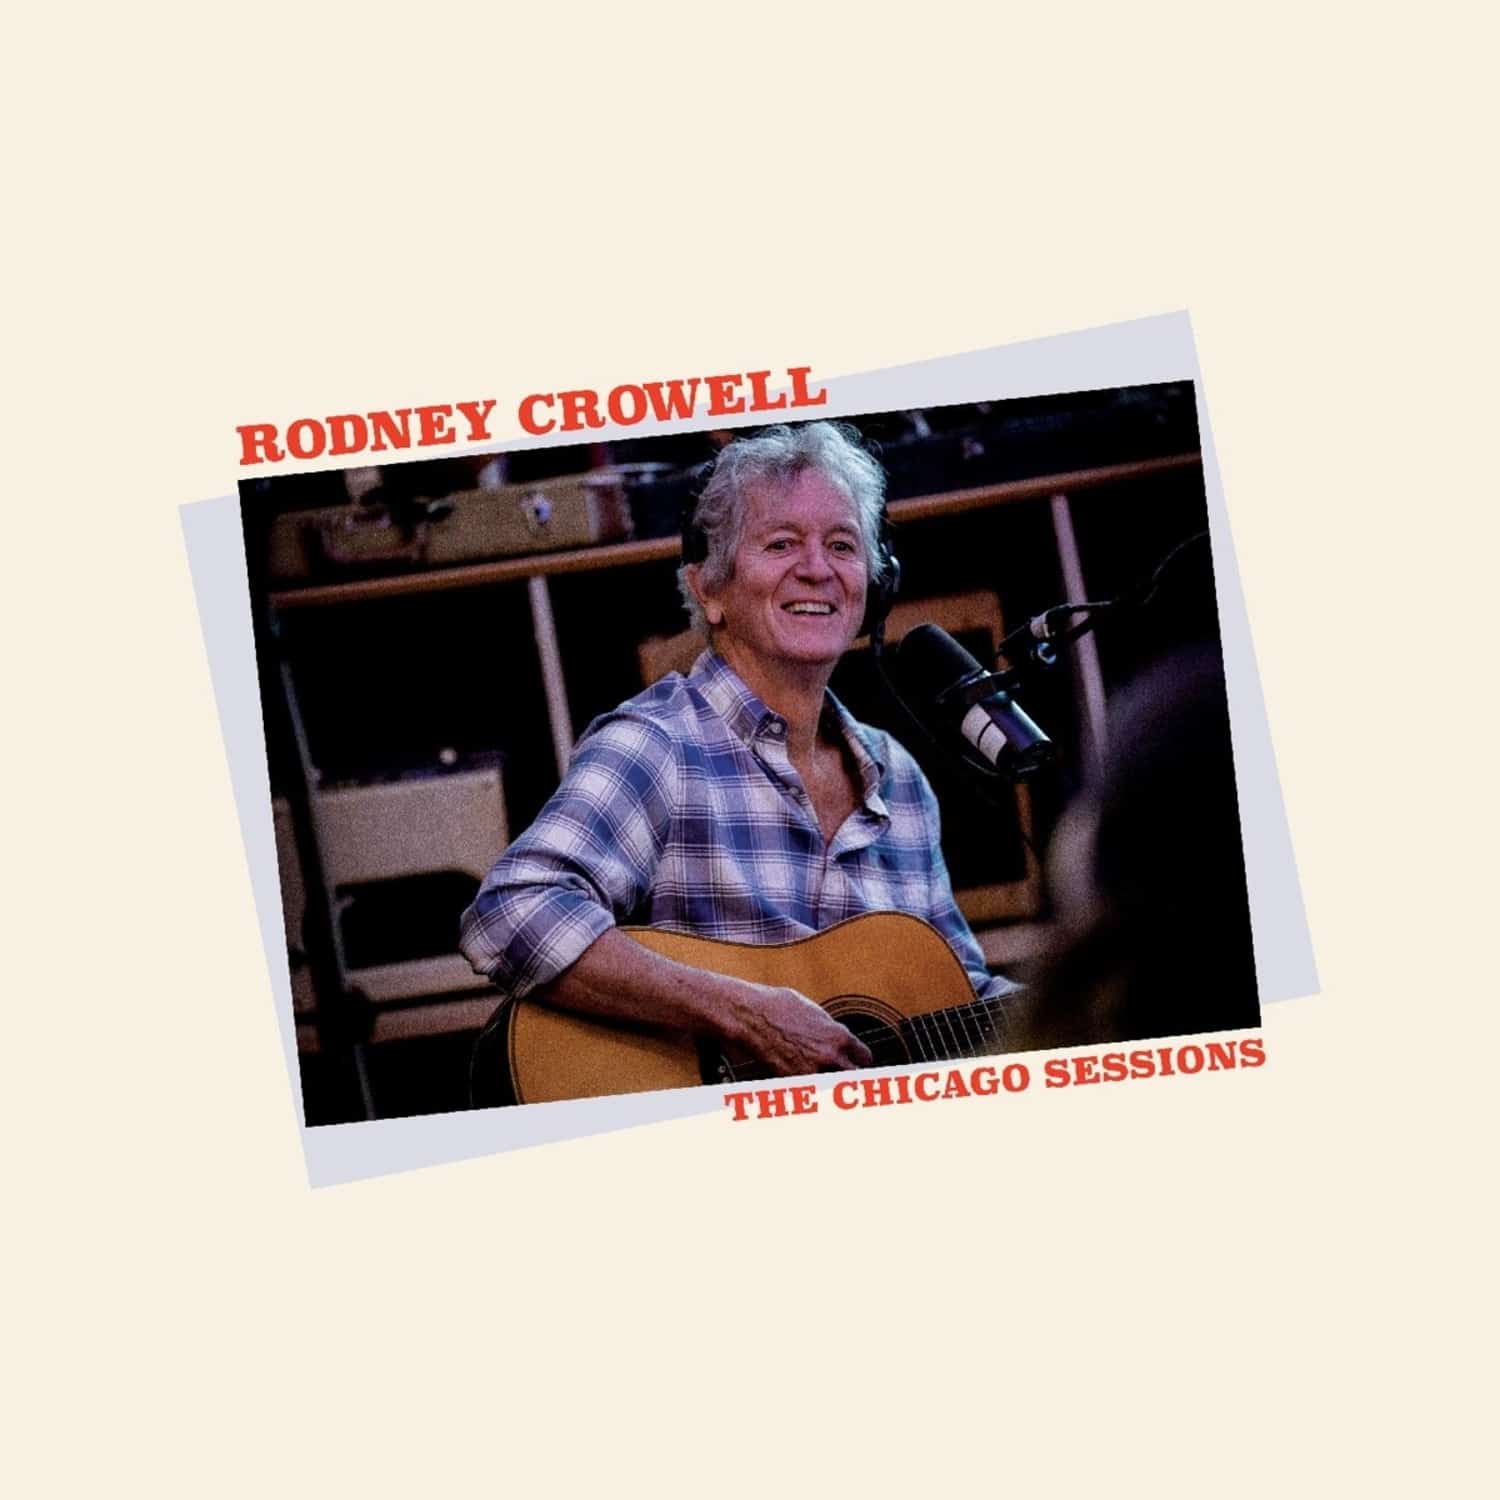  Rodney Crowell - CHICAGO SESSIONS 